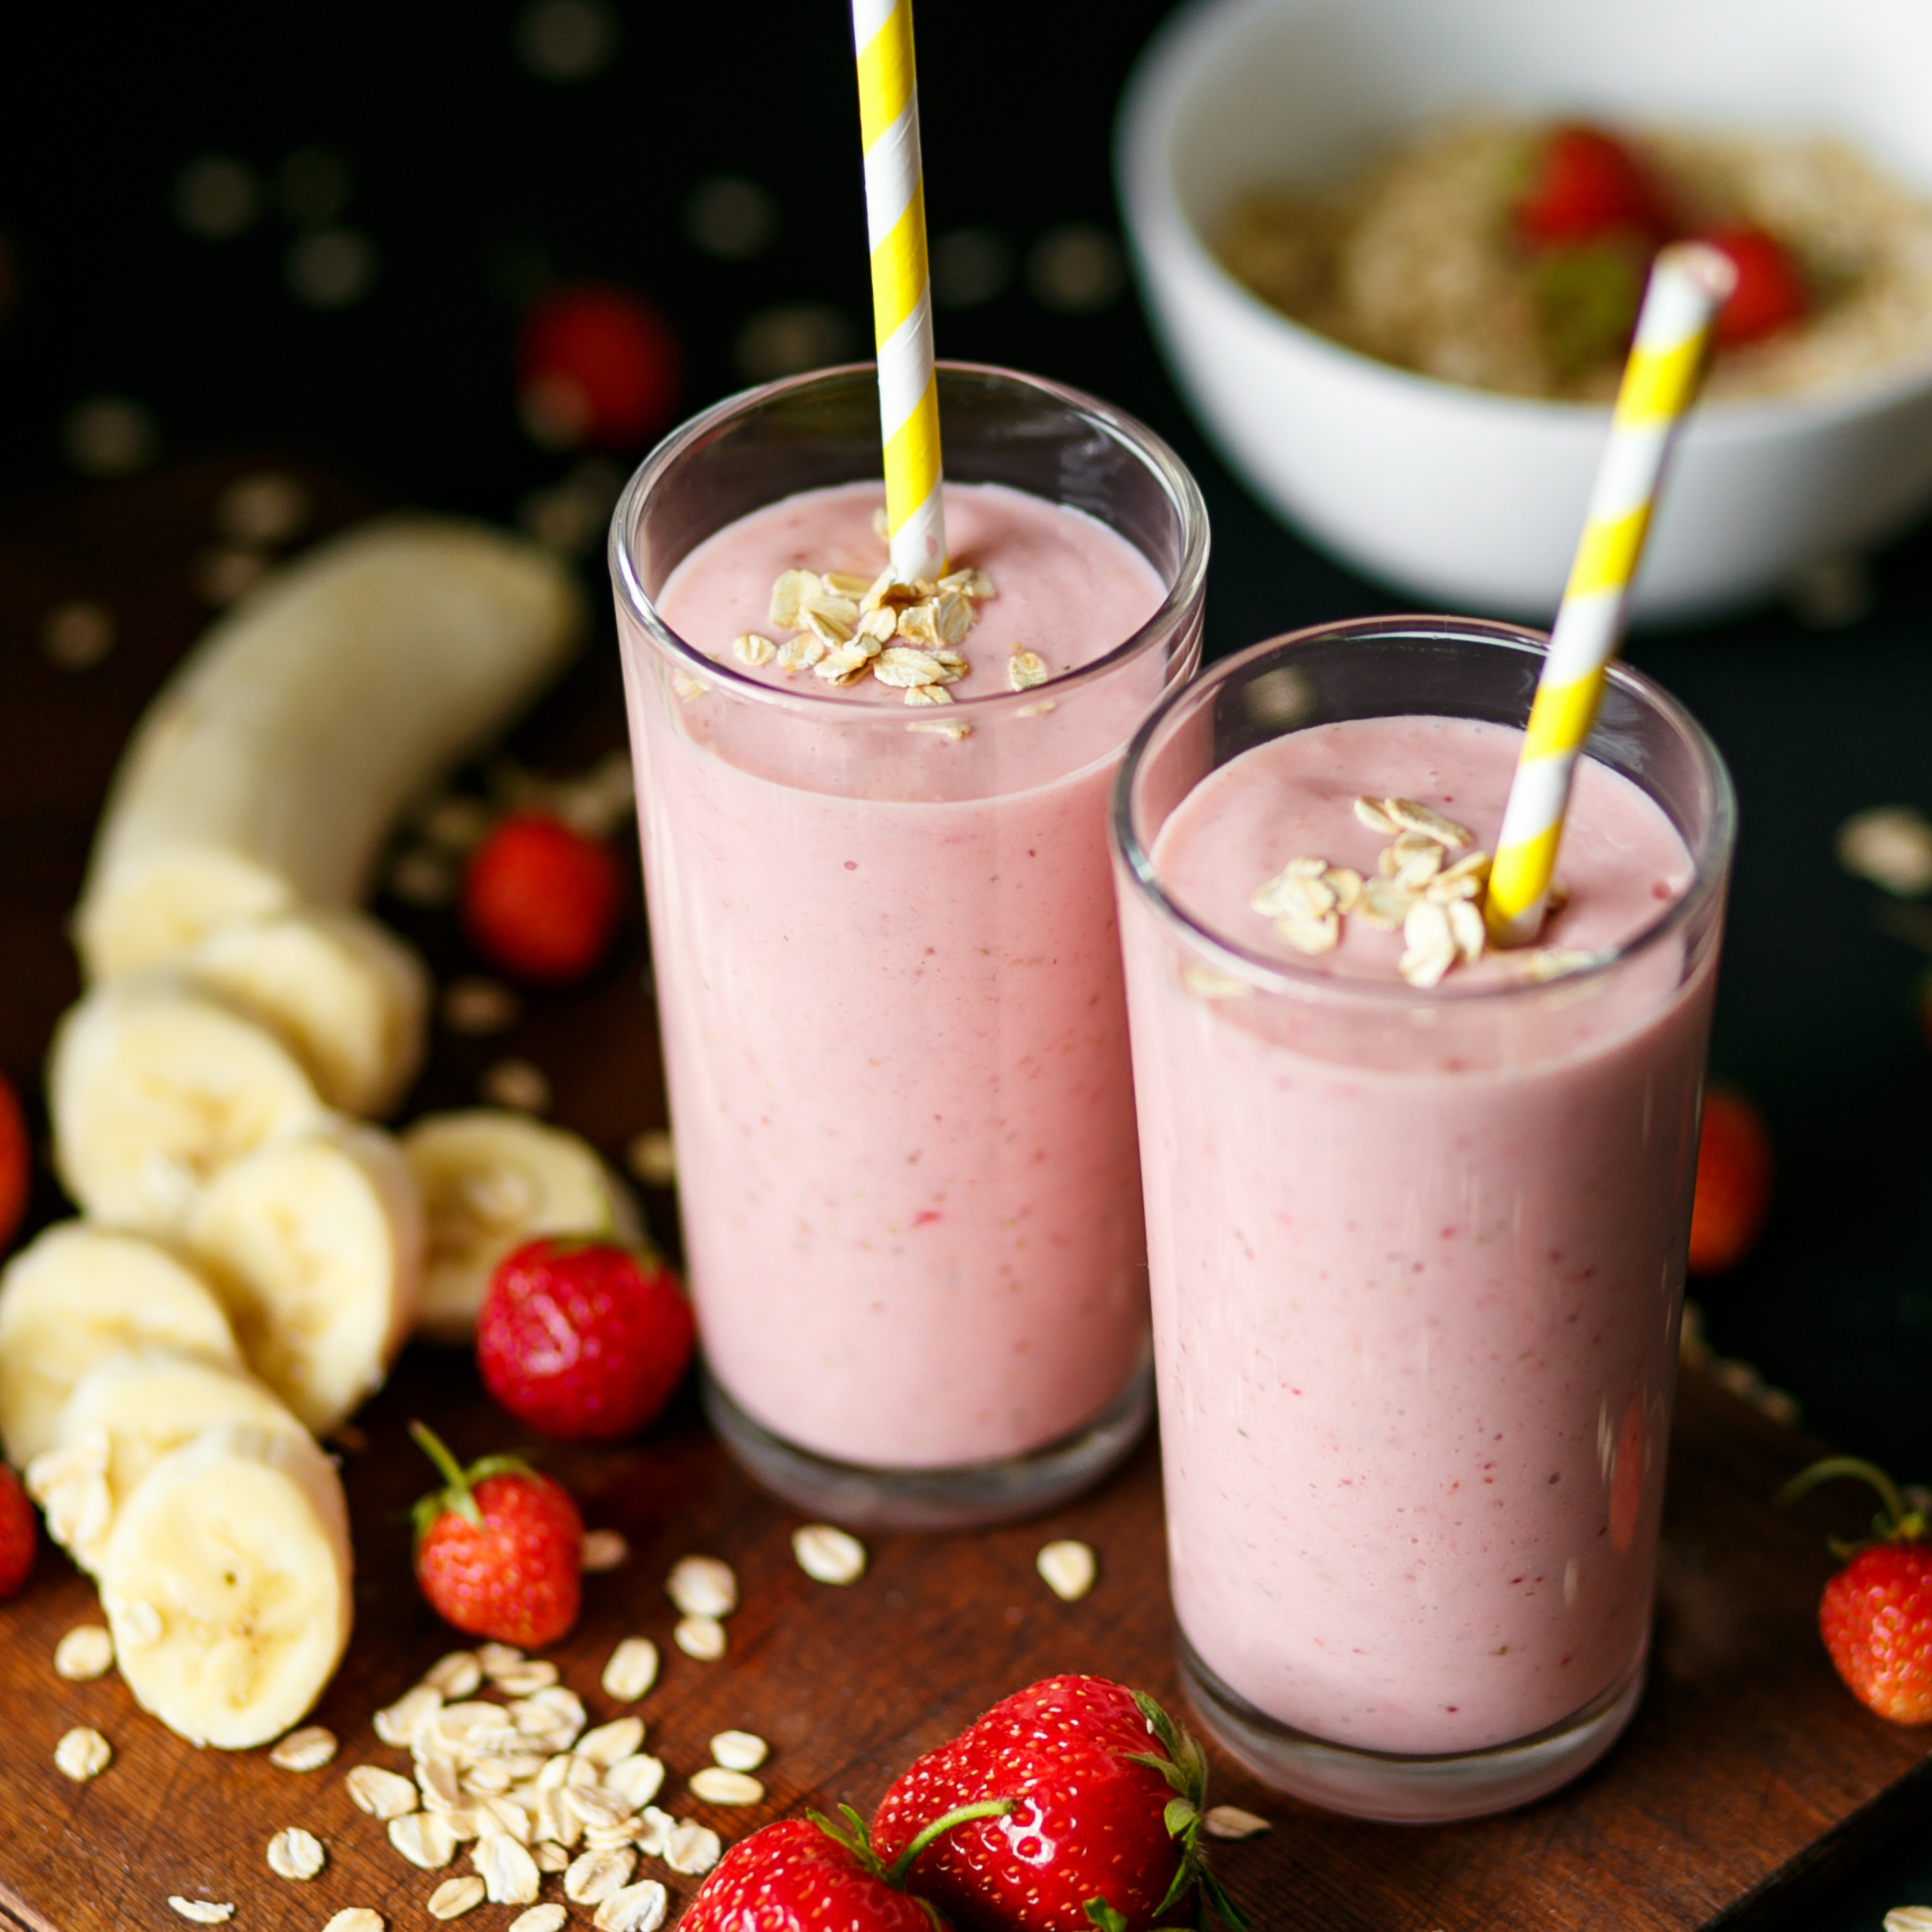 https://cdn.shopify.com/s/files/1/0090/1126/5595/products/strawberrybananasmoothie.png?v=1625682039